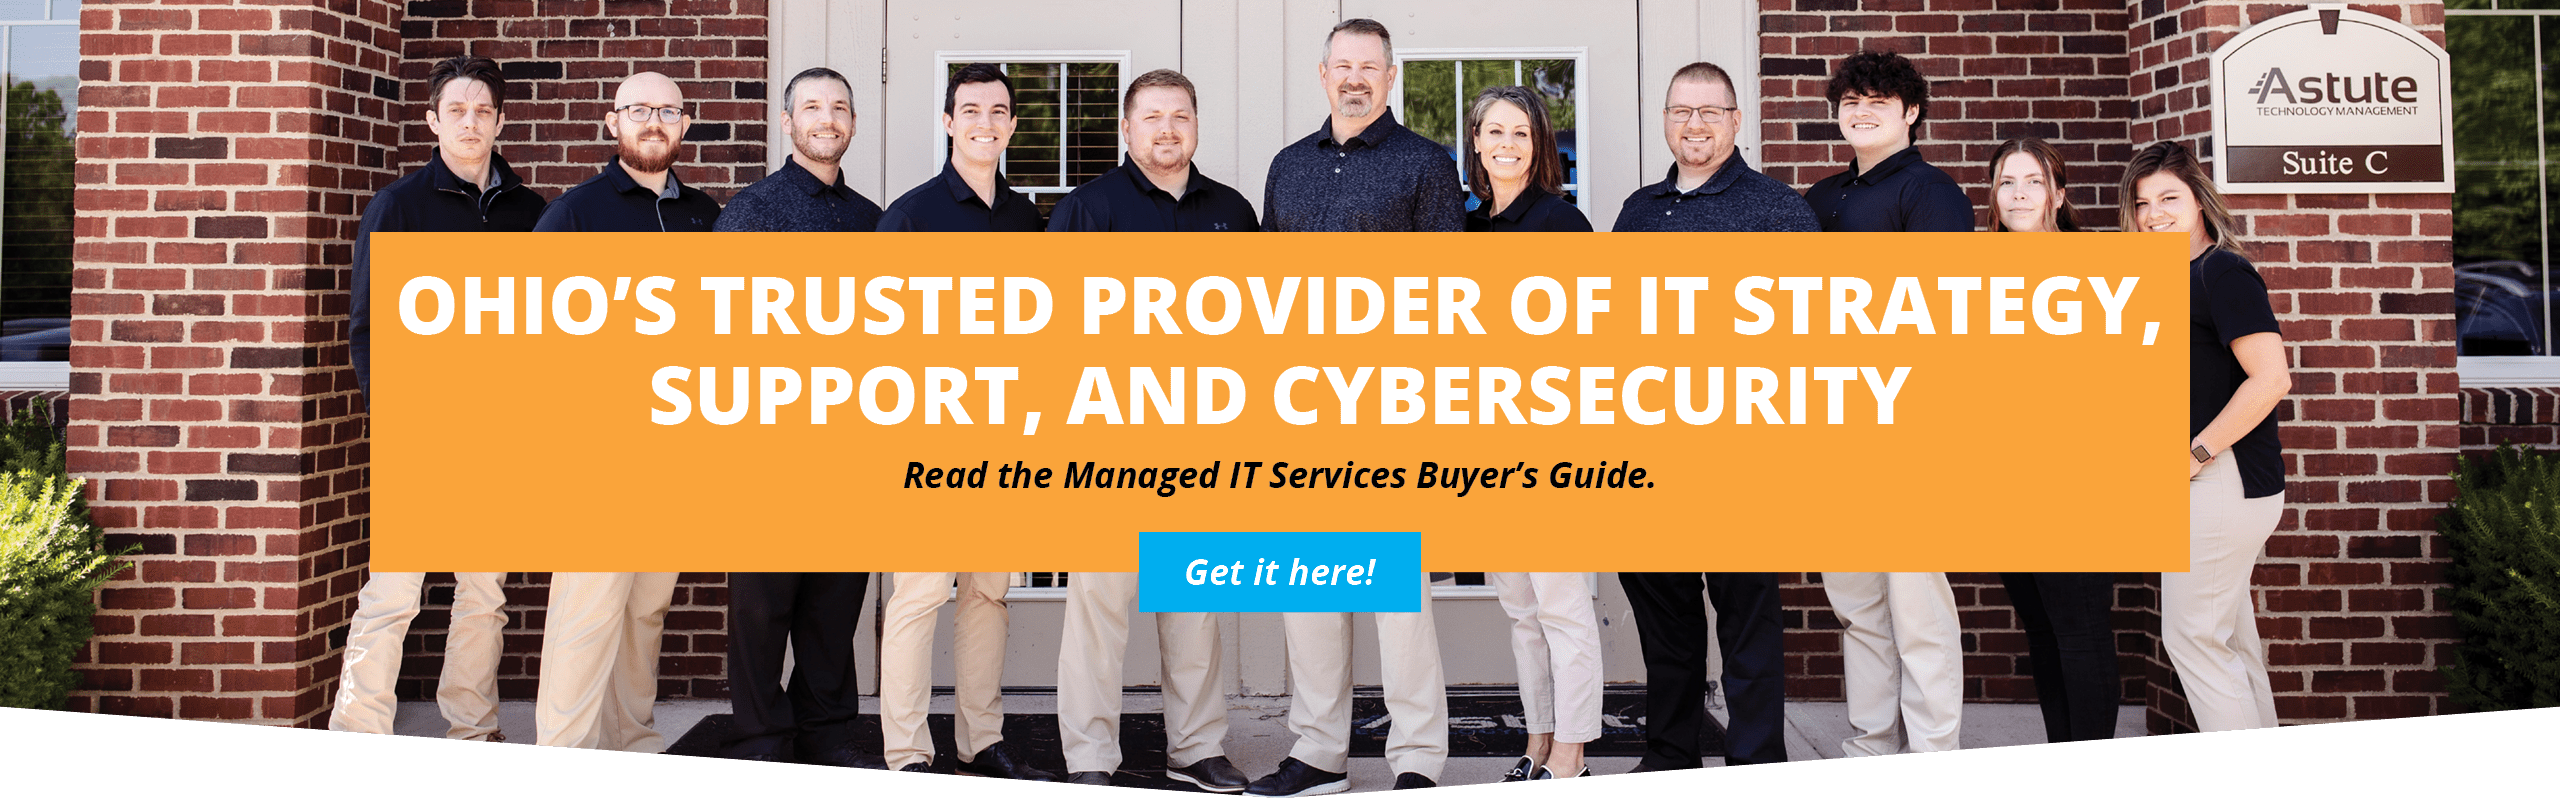 Ohio's trusted provider of IT strategy, support, and cybersecurity. Read the managed IT services buyer�s guide.